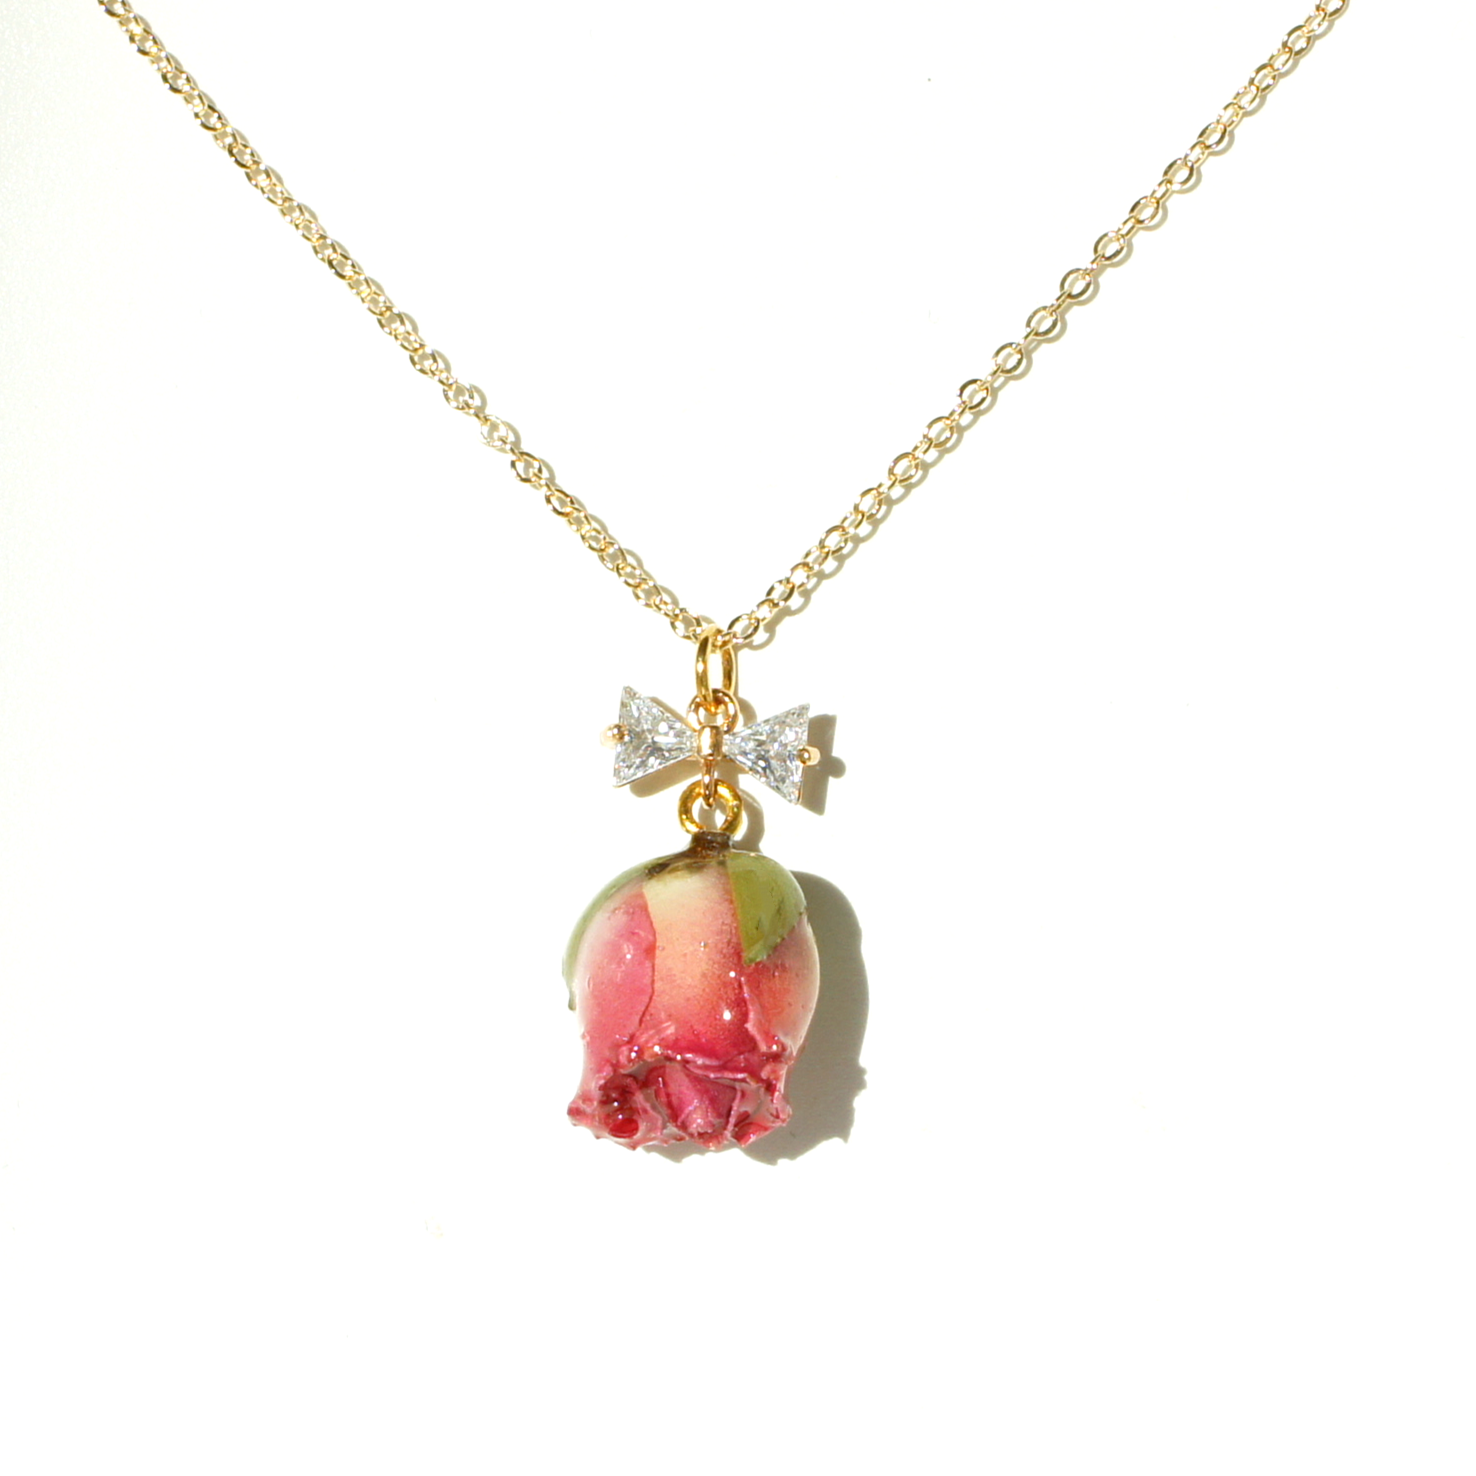 *REAL FLOWER* Rosa Brillante Rosebud Pendant Chain Necklace with Crystal Leaves